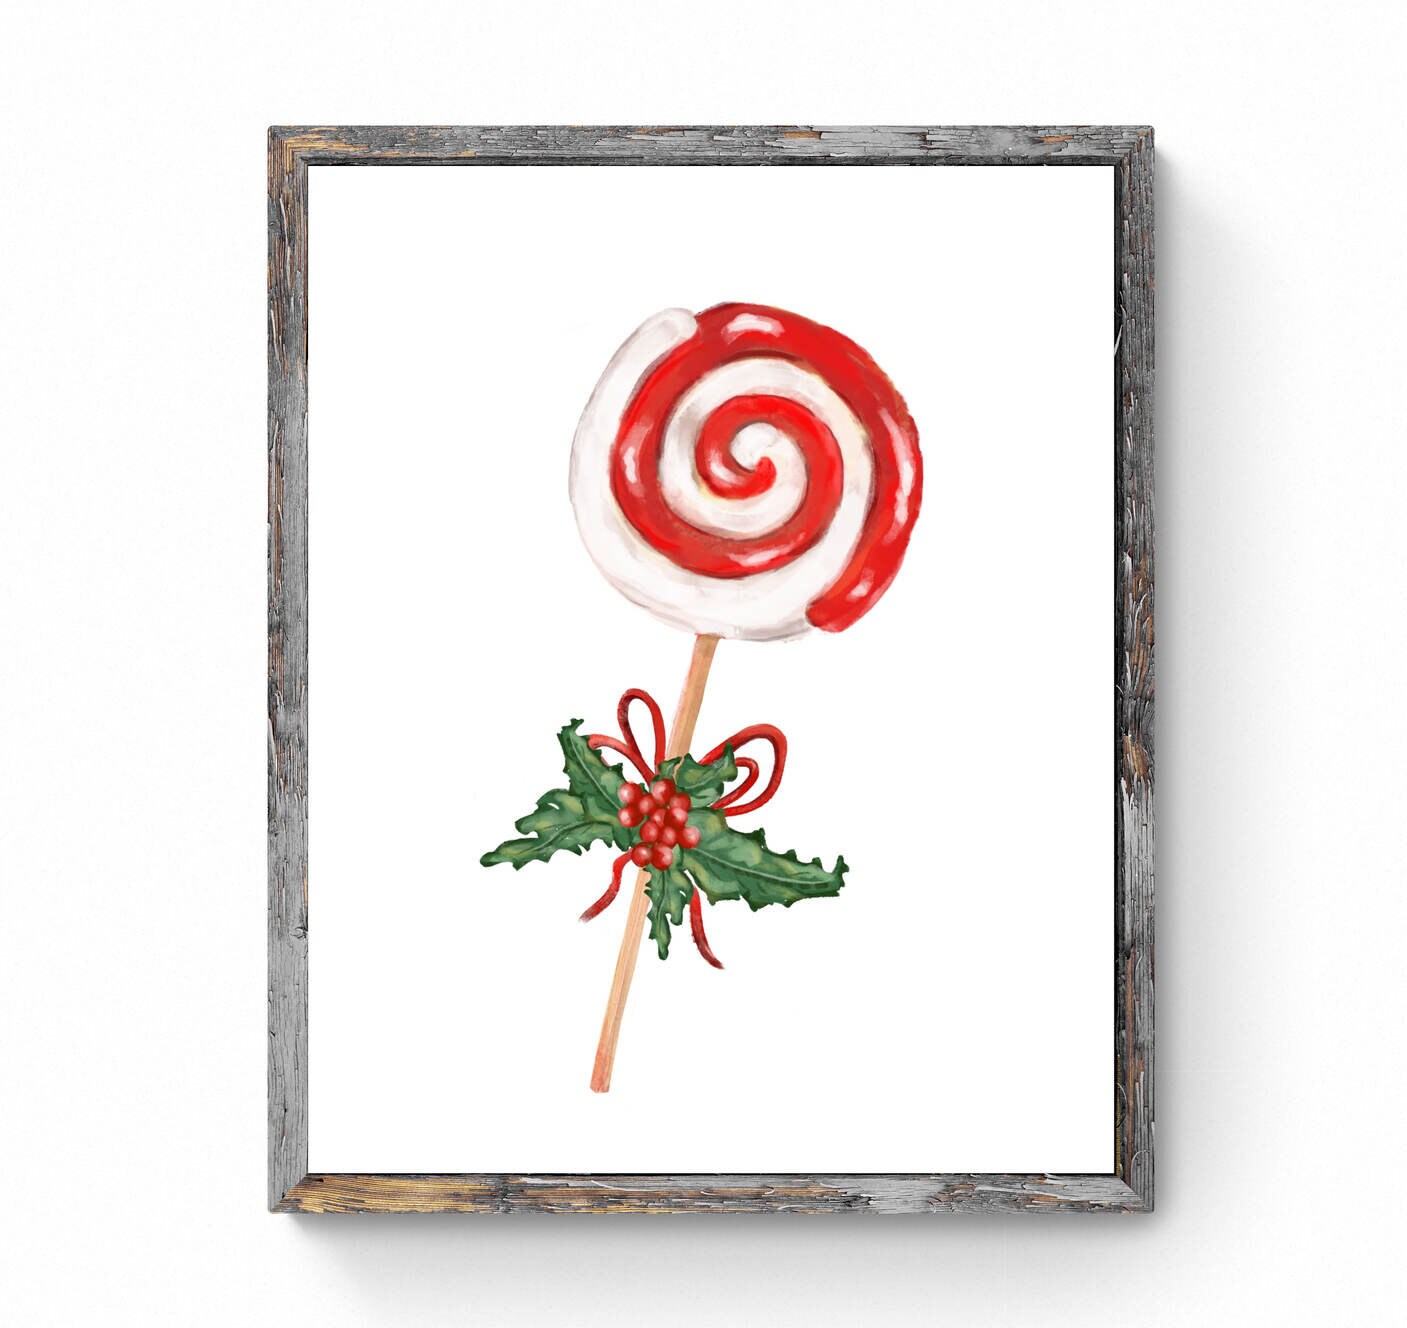 Christmas Peppermint Candy Art Print, Winter Art, Xmas Swirl Candy Artwork, New Years Home Decor, Candy Wall Art, Xmas Holiday Decoration